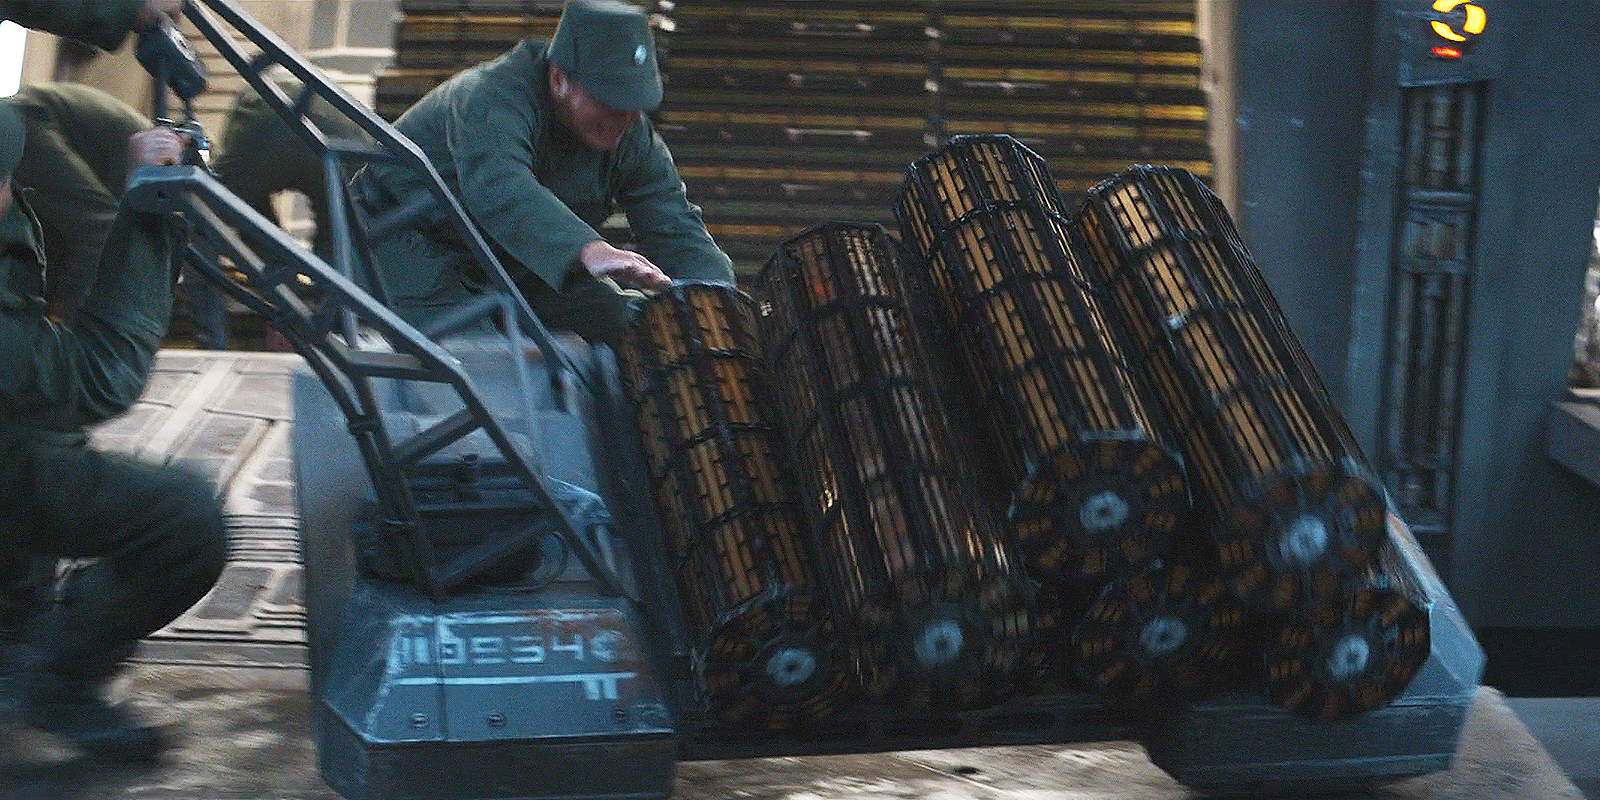 A still from Andor episode 6 showing Imperial officers loading pallets of credits onto a freighter.